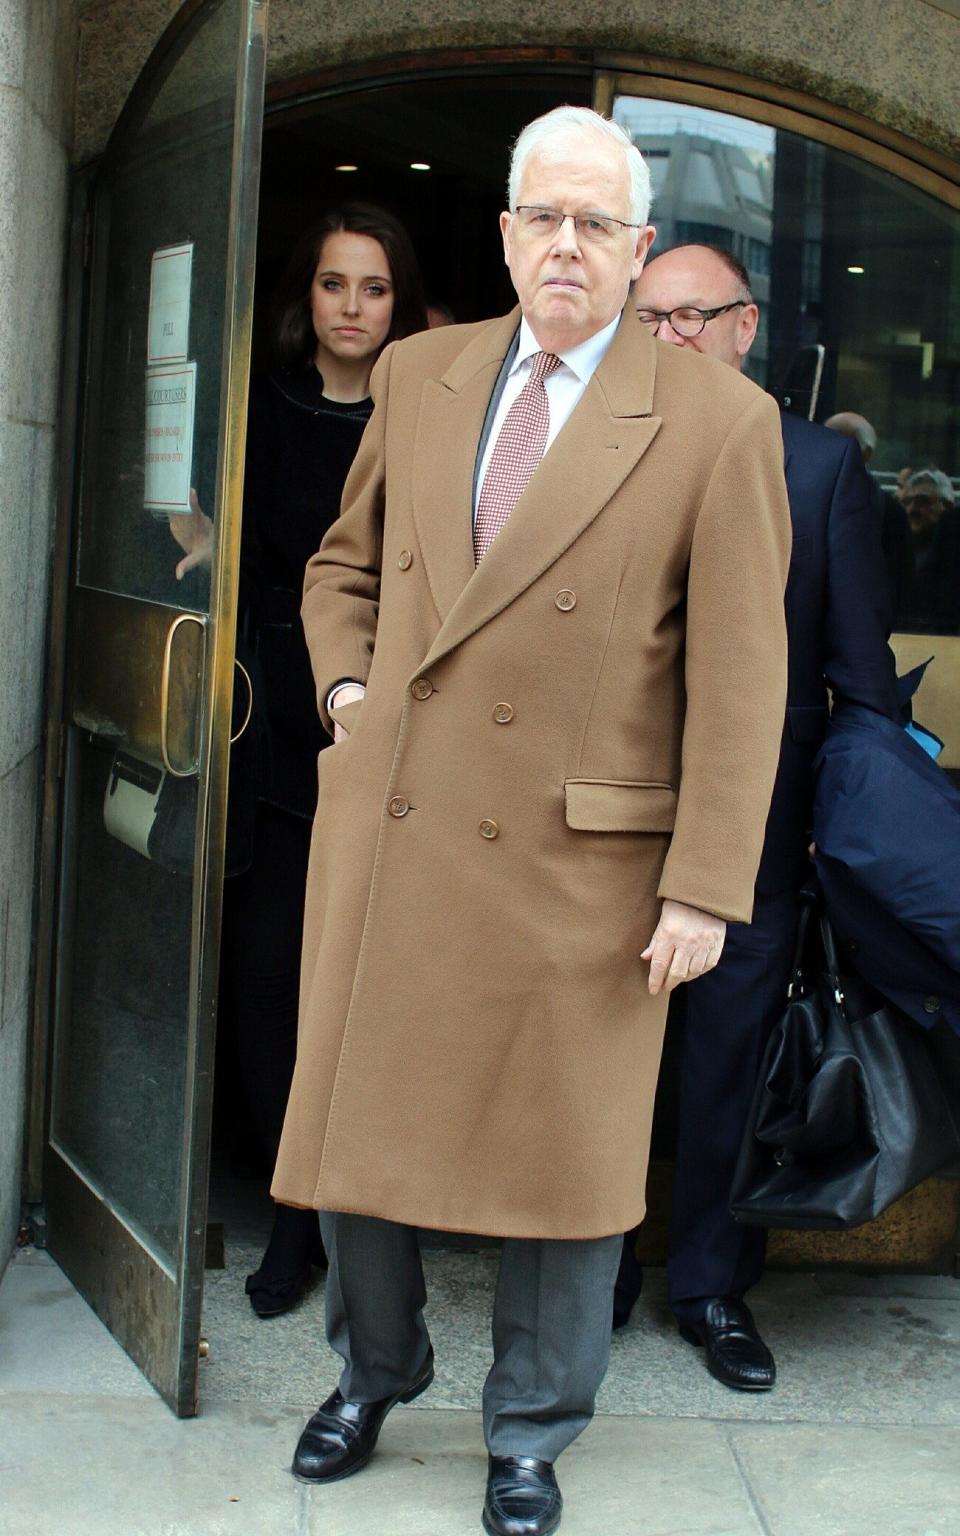 John Kay leaving the Old Bailey following his acquittal in 2015 - Ed Willcox/ Central News